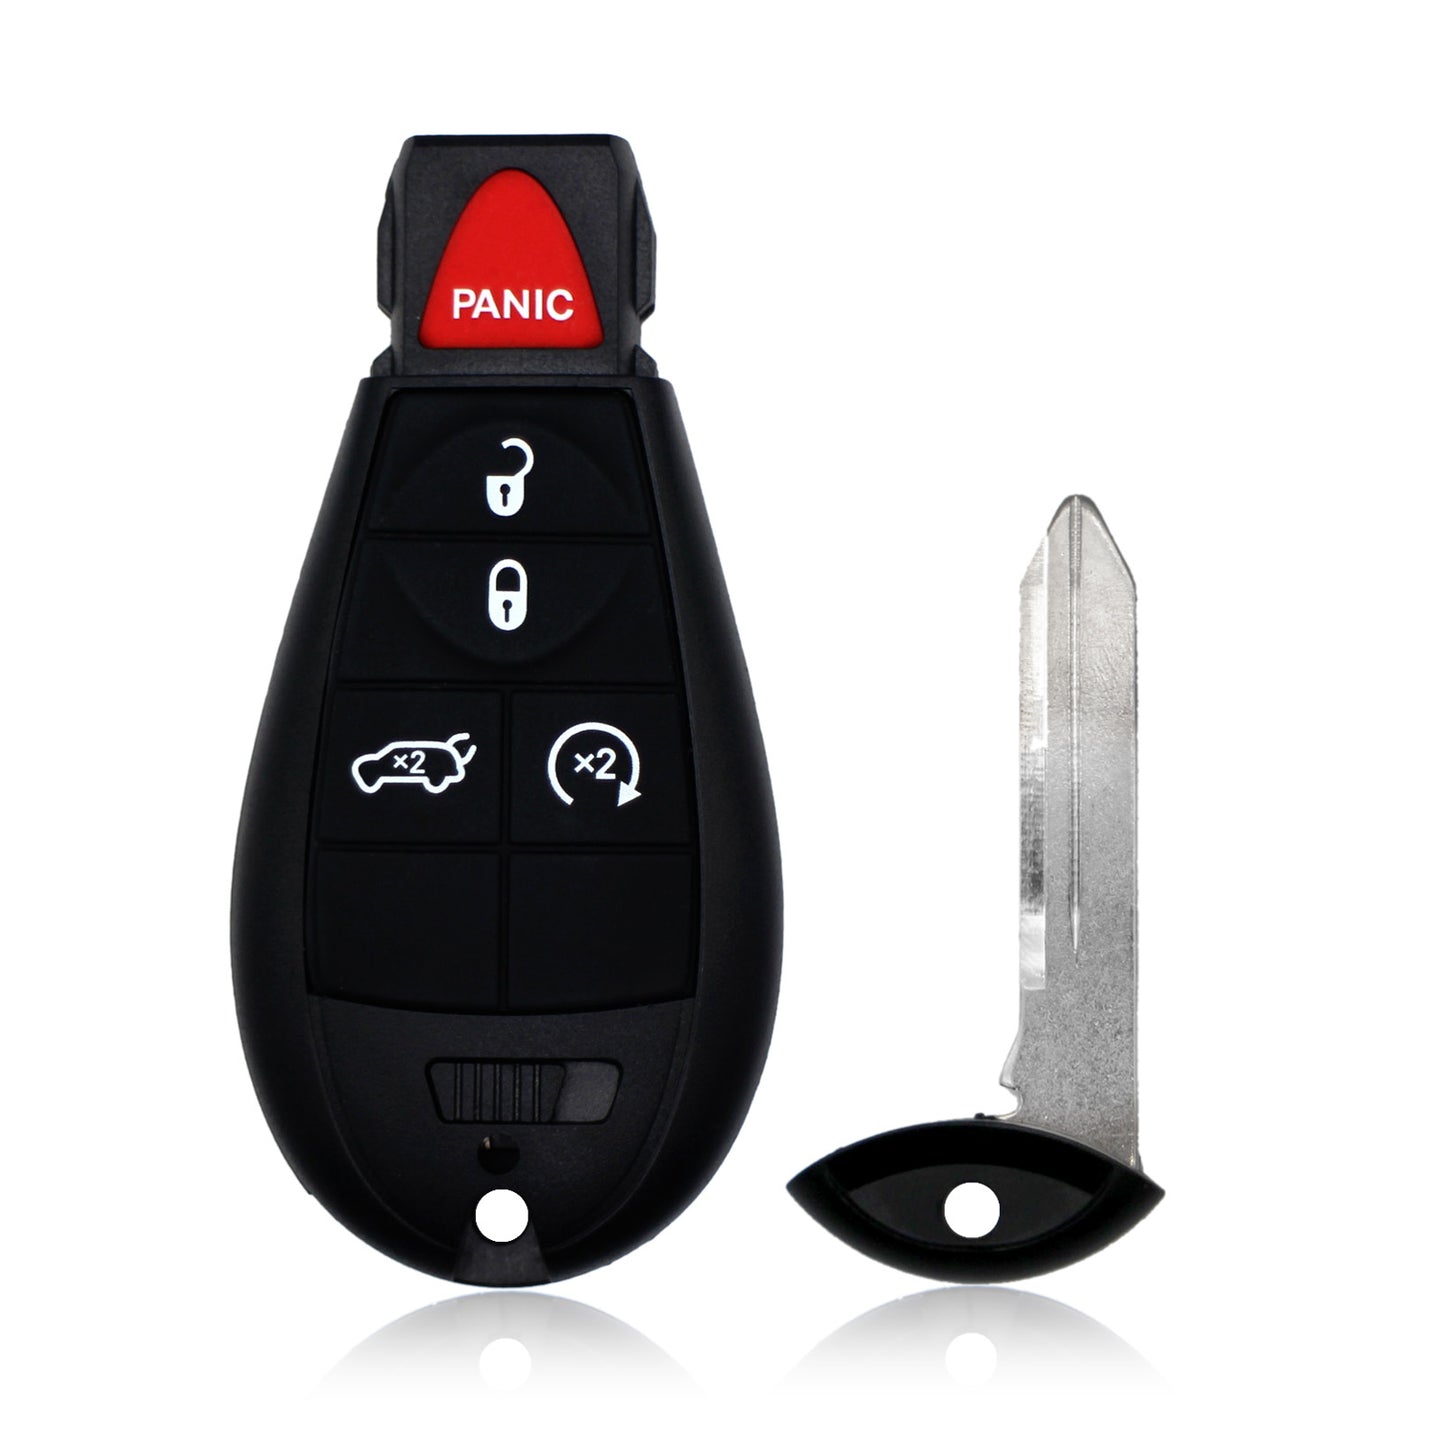 5 Buttons 433MHz Keyless Entry Fob Remote Car Key For 2014- 2020 Jeep Cherokee FCC ID: GQ4-53T SKU : J913